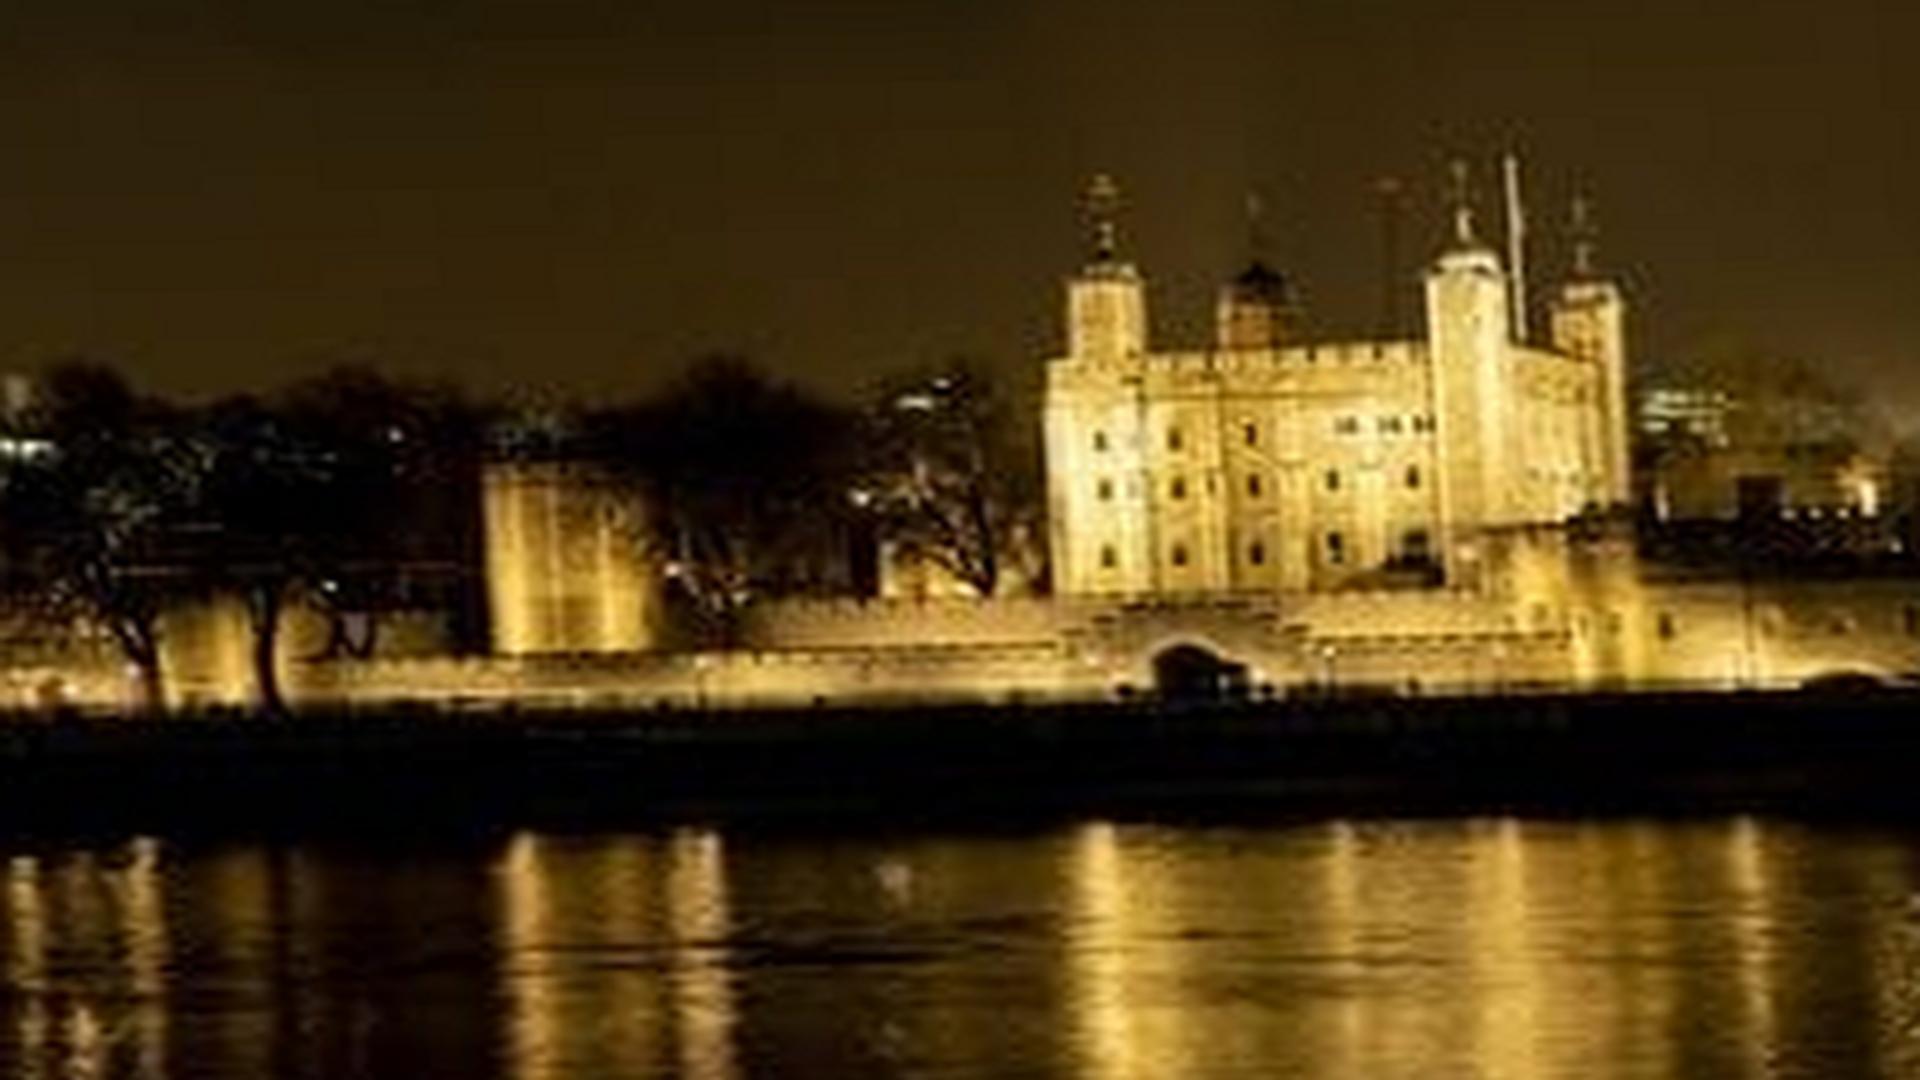 Unusal Facts About The Tower Of London